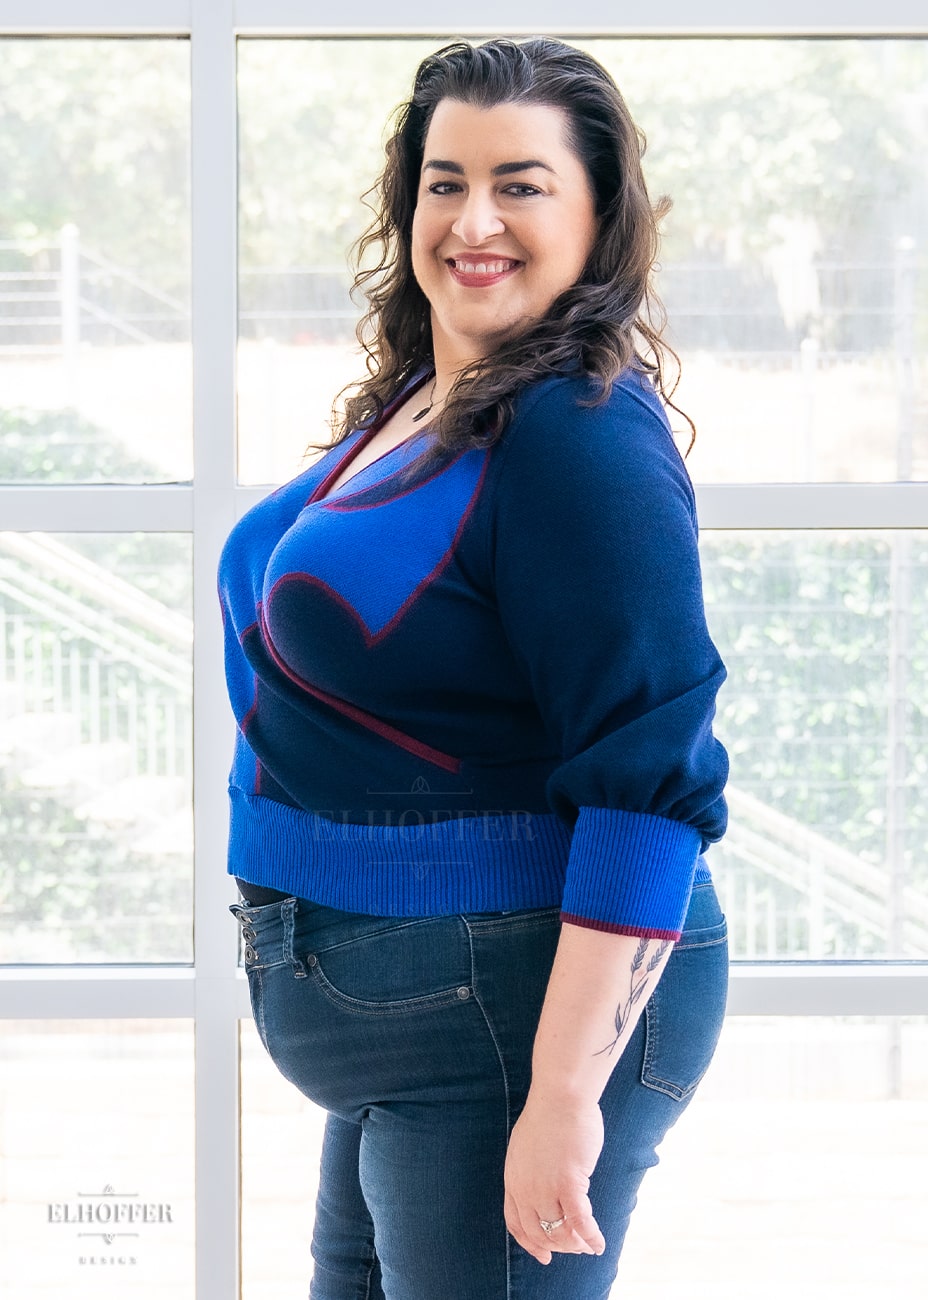 Heather, a size XL medium fair skinned model with long curly brown hair, wearing a crossover knit crop top. The base is a dark blue, details are bright blue with a red outline and form almost a t shape in the middle of the crop. The cuffs and bottom are the same bright blue of the detail and the crossover is piped in the same red. She stands sideways giving a better look at the three quarter sleeves.